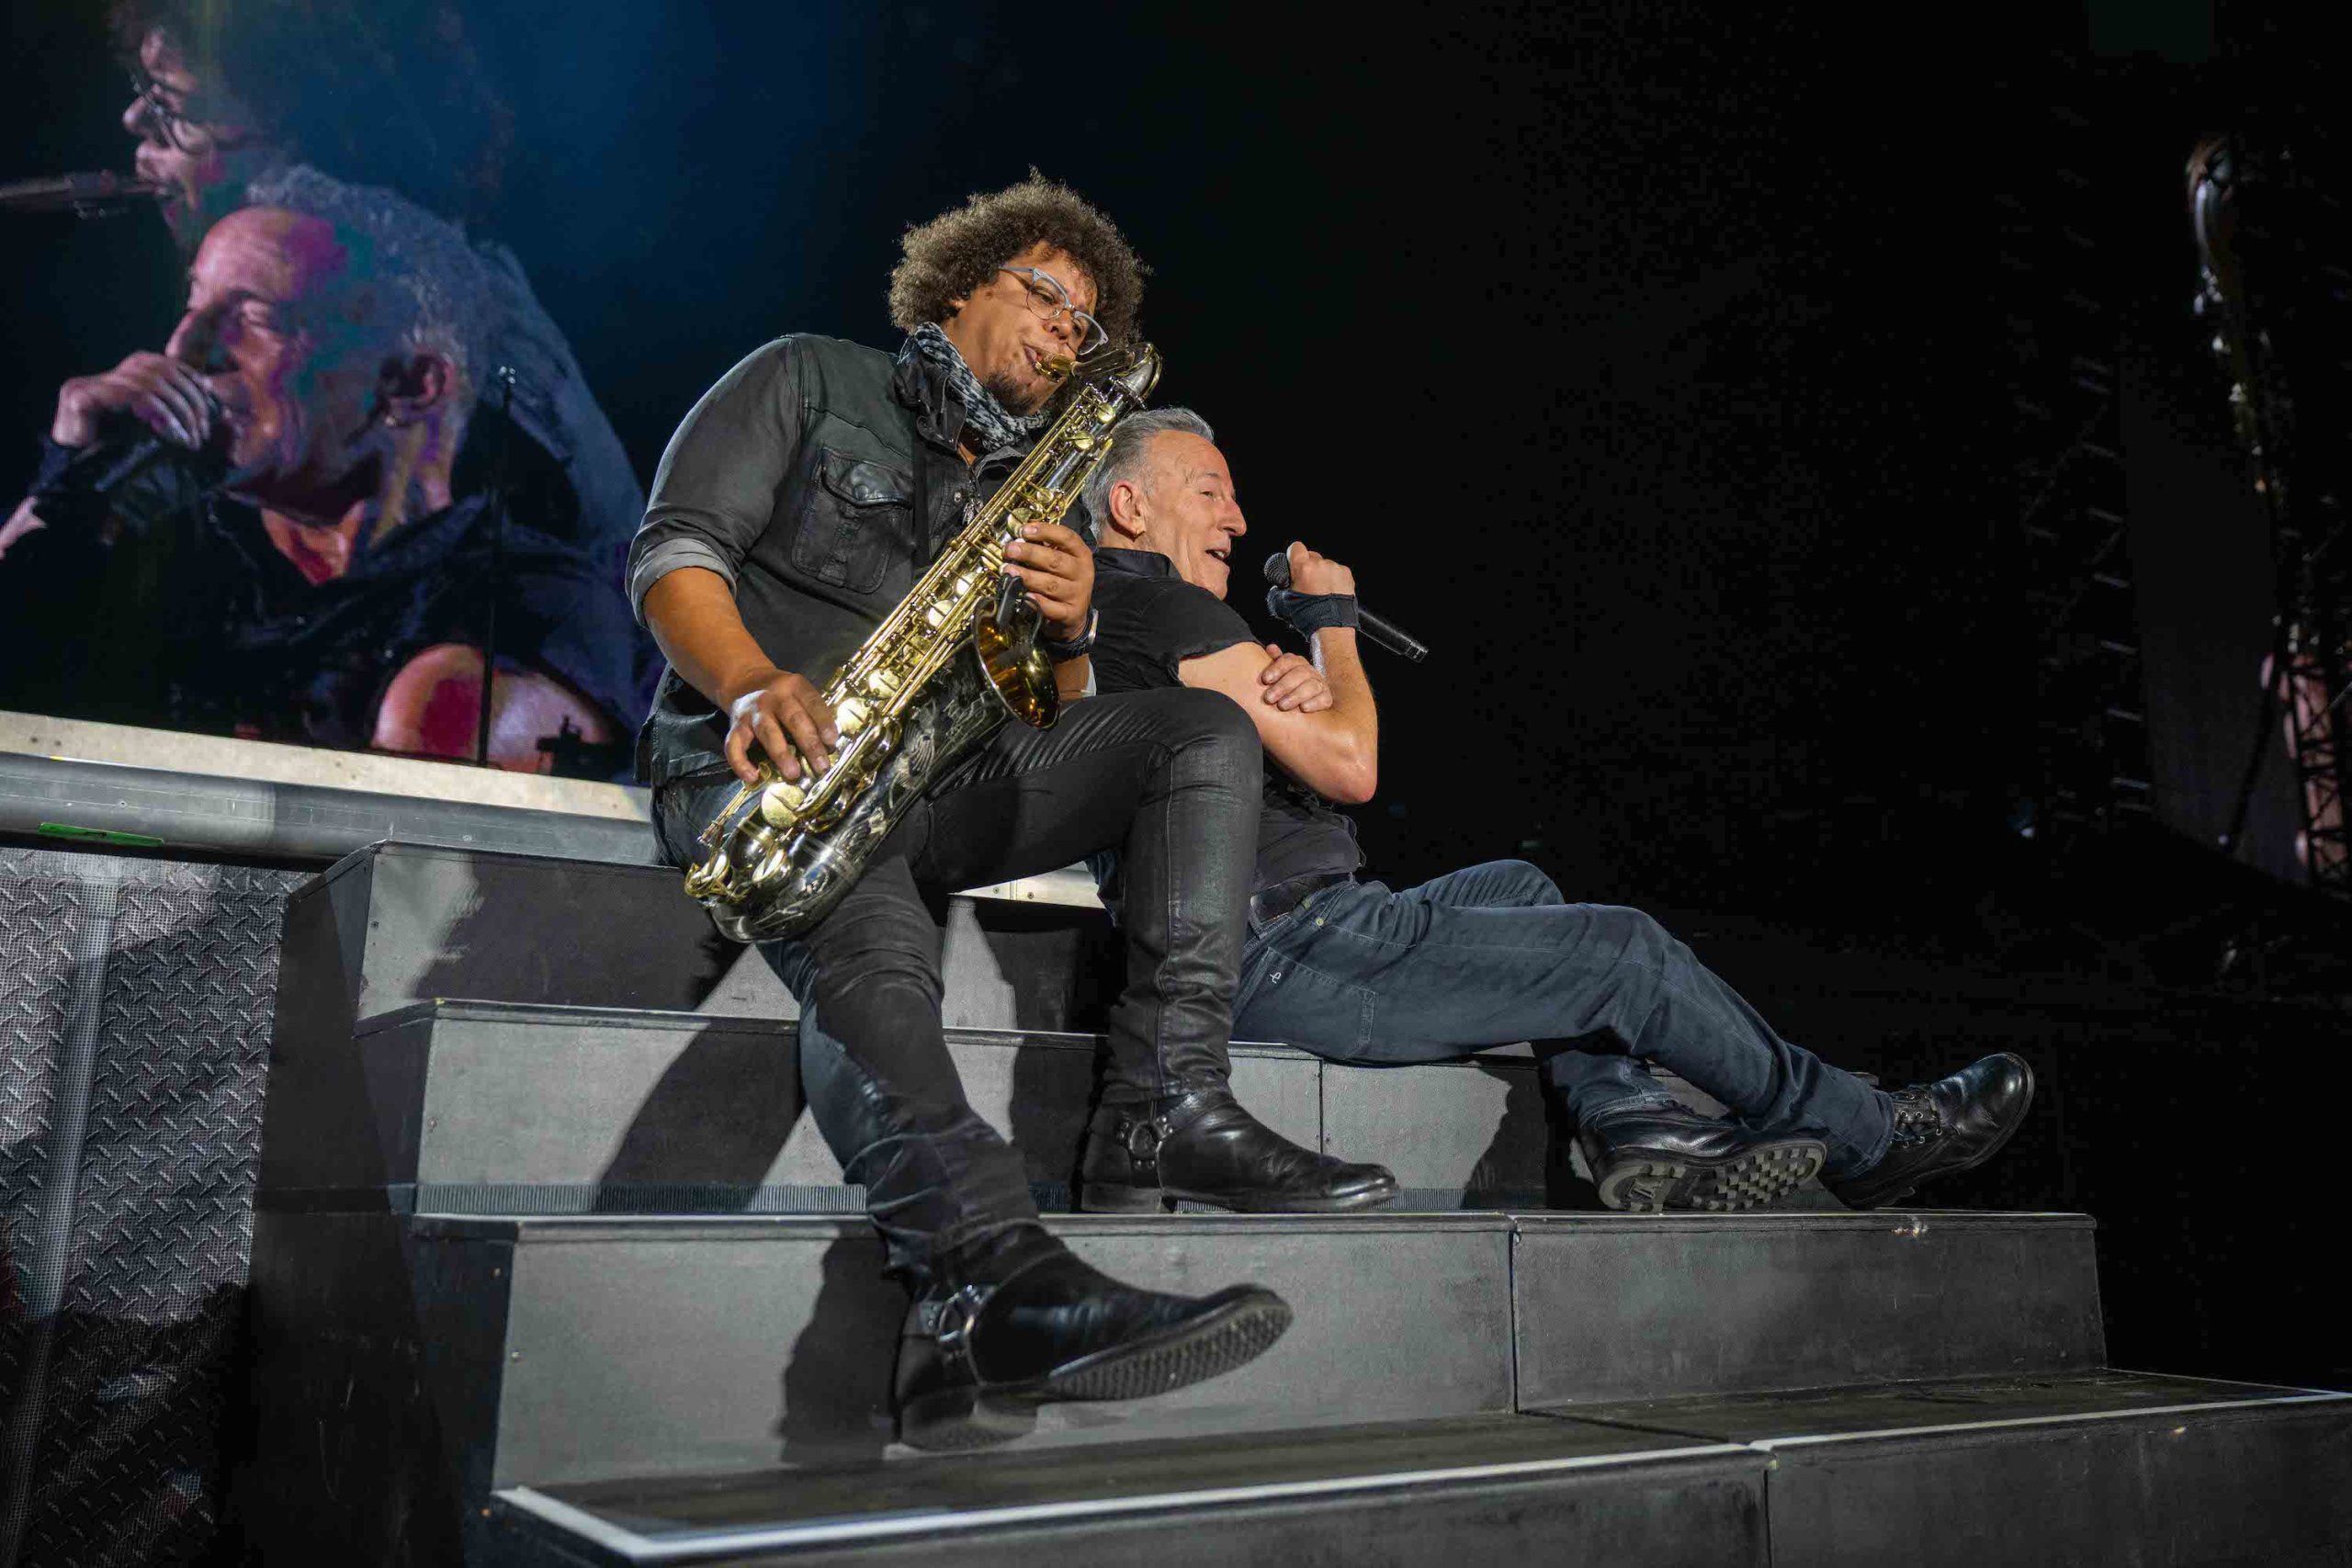 Bruce Springsteen & E Street Band at MetLife Stadium, East Rutherford, New Jersey on September 1, 2023.